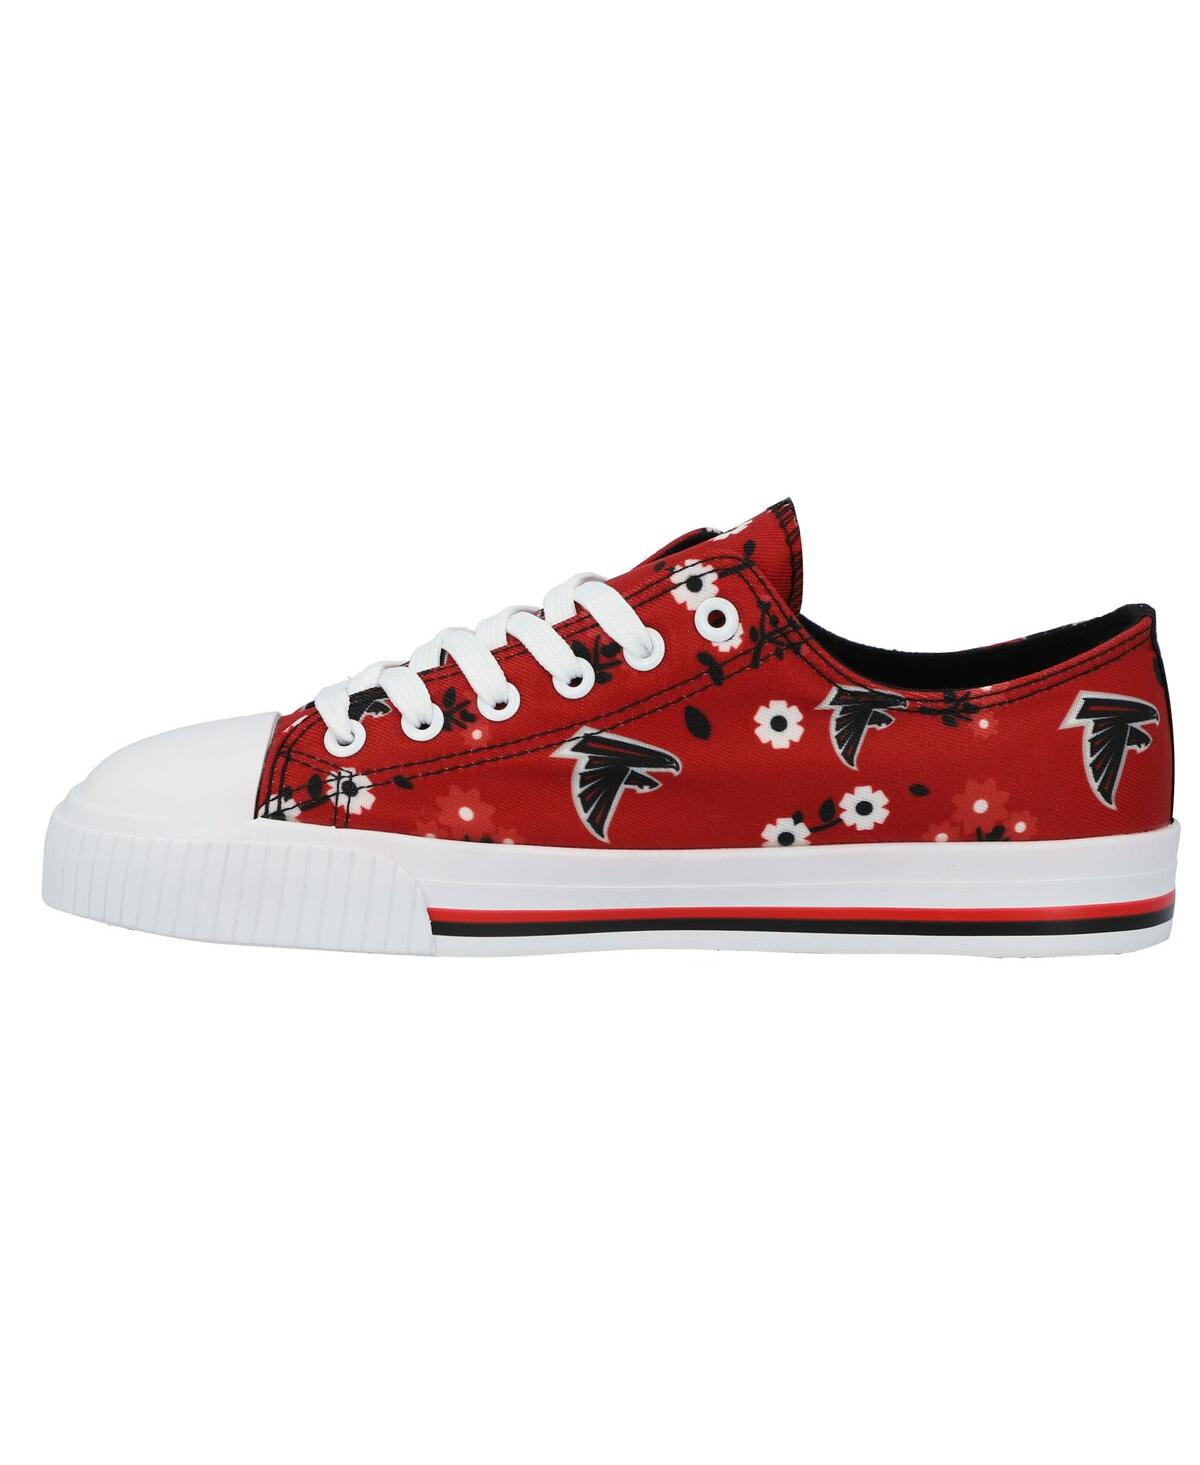 Women's Foco Red Atlanta Falcons Flower Canvas Allover Shoes - Red